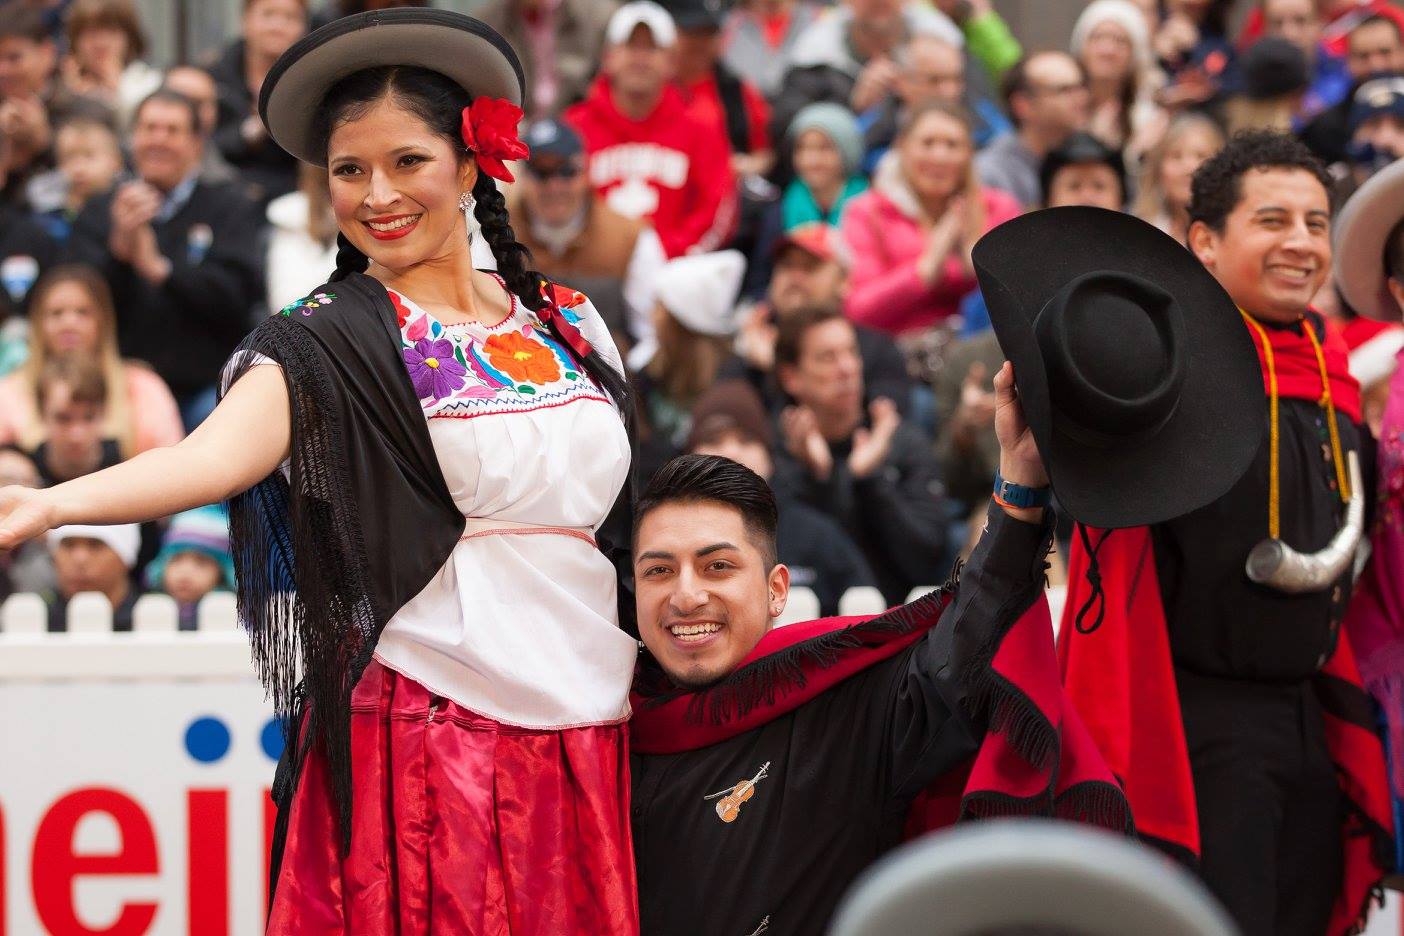 Two performers from Renacer Boliviano post for the camera after a performance in the 2015 Chicago Thanksgiving Parade